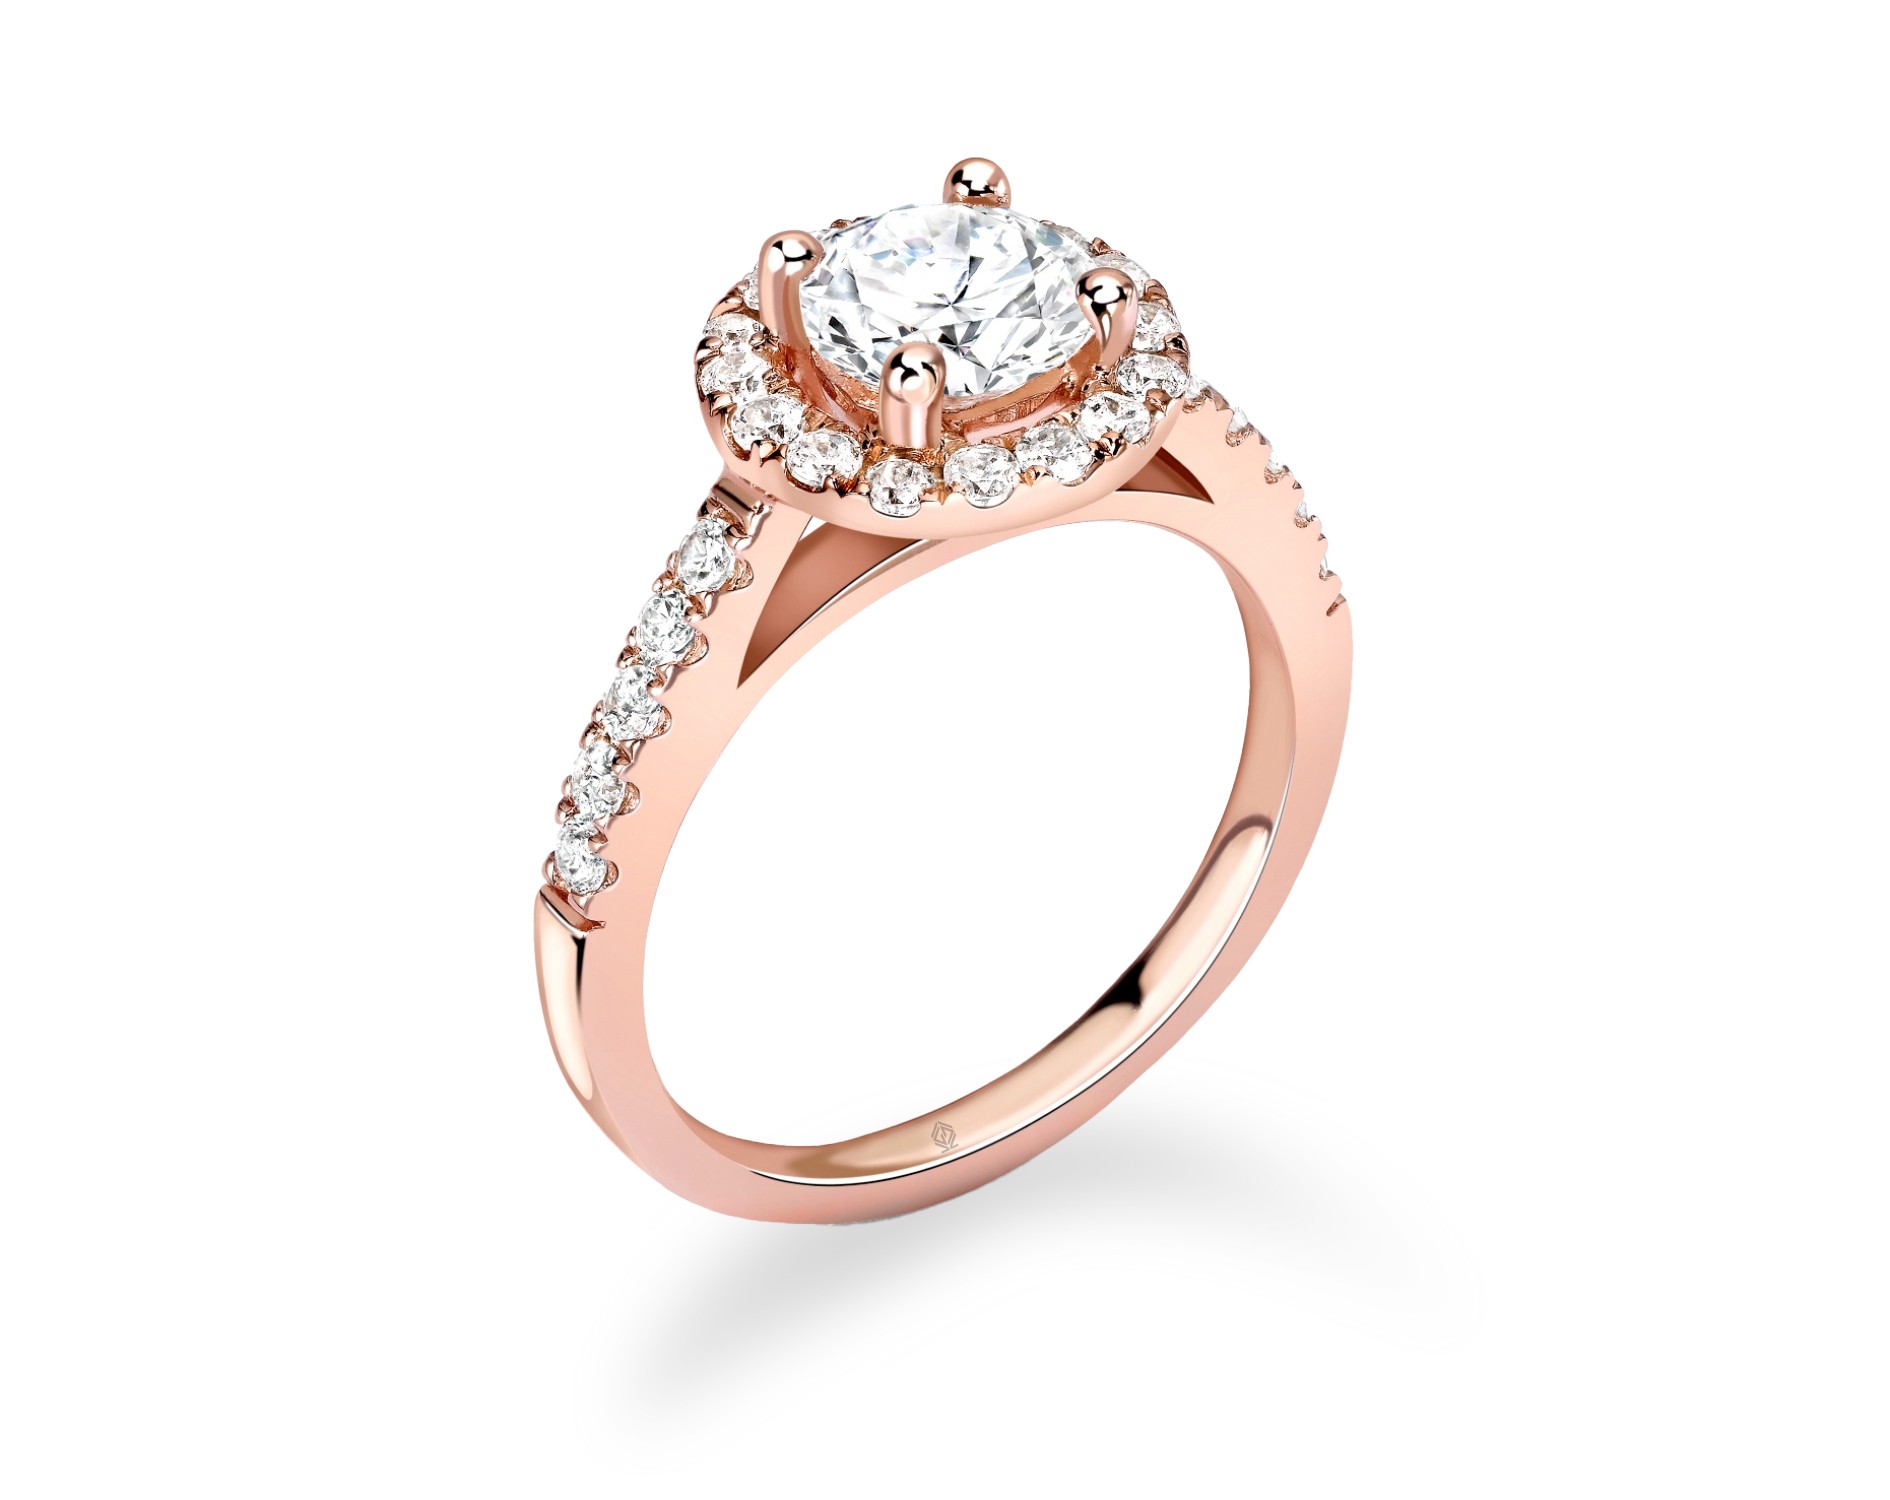 18K ROSE GOLD 4 PRONGS HALO ROUND CUT DIAMOND ENGAGEMENT RING WITH SIDE STONES PAVE SET